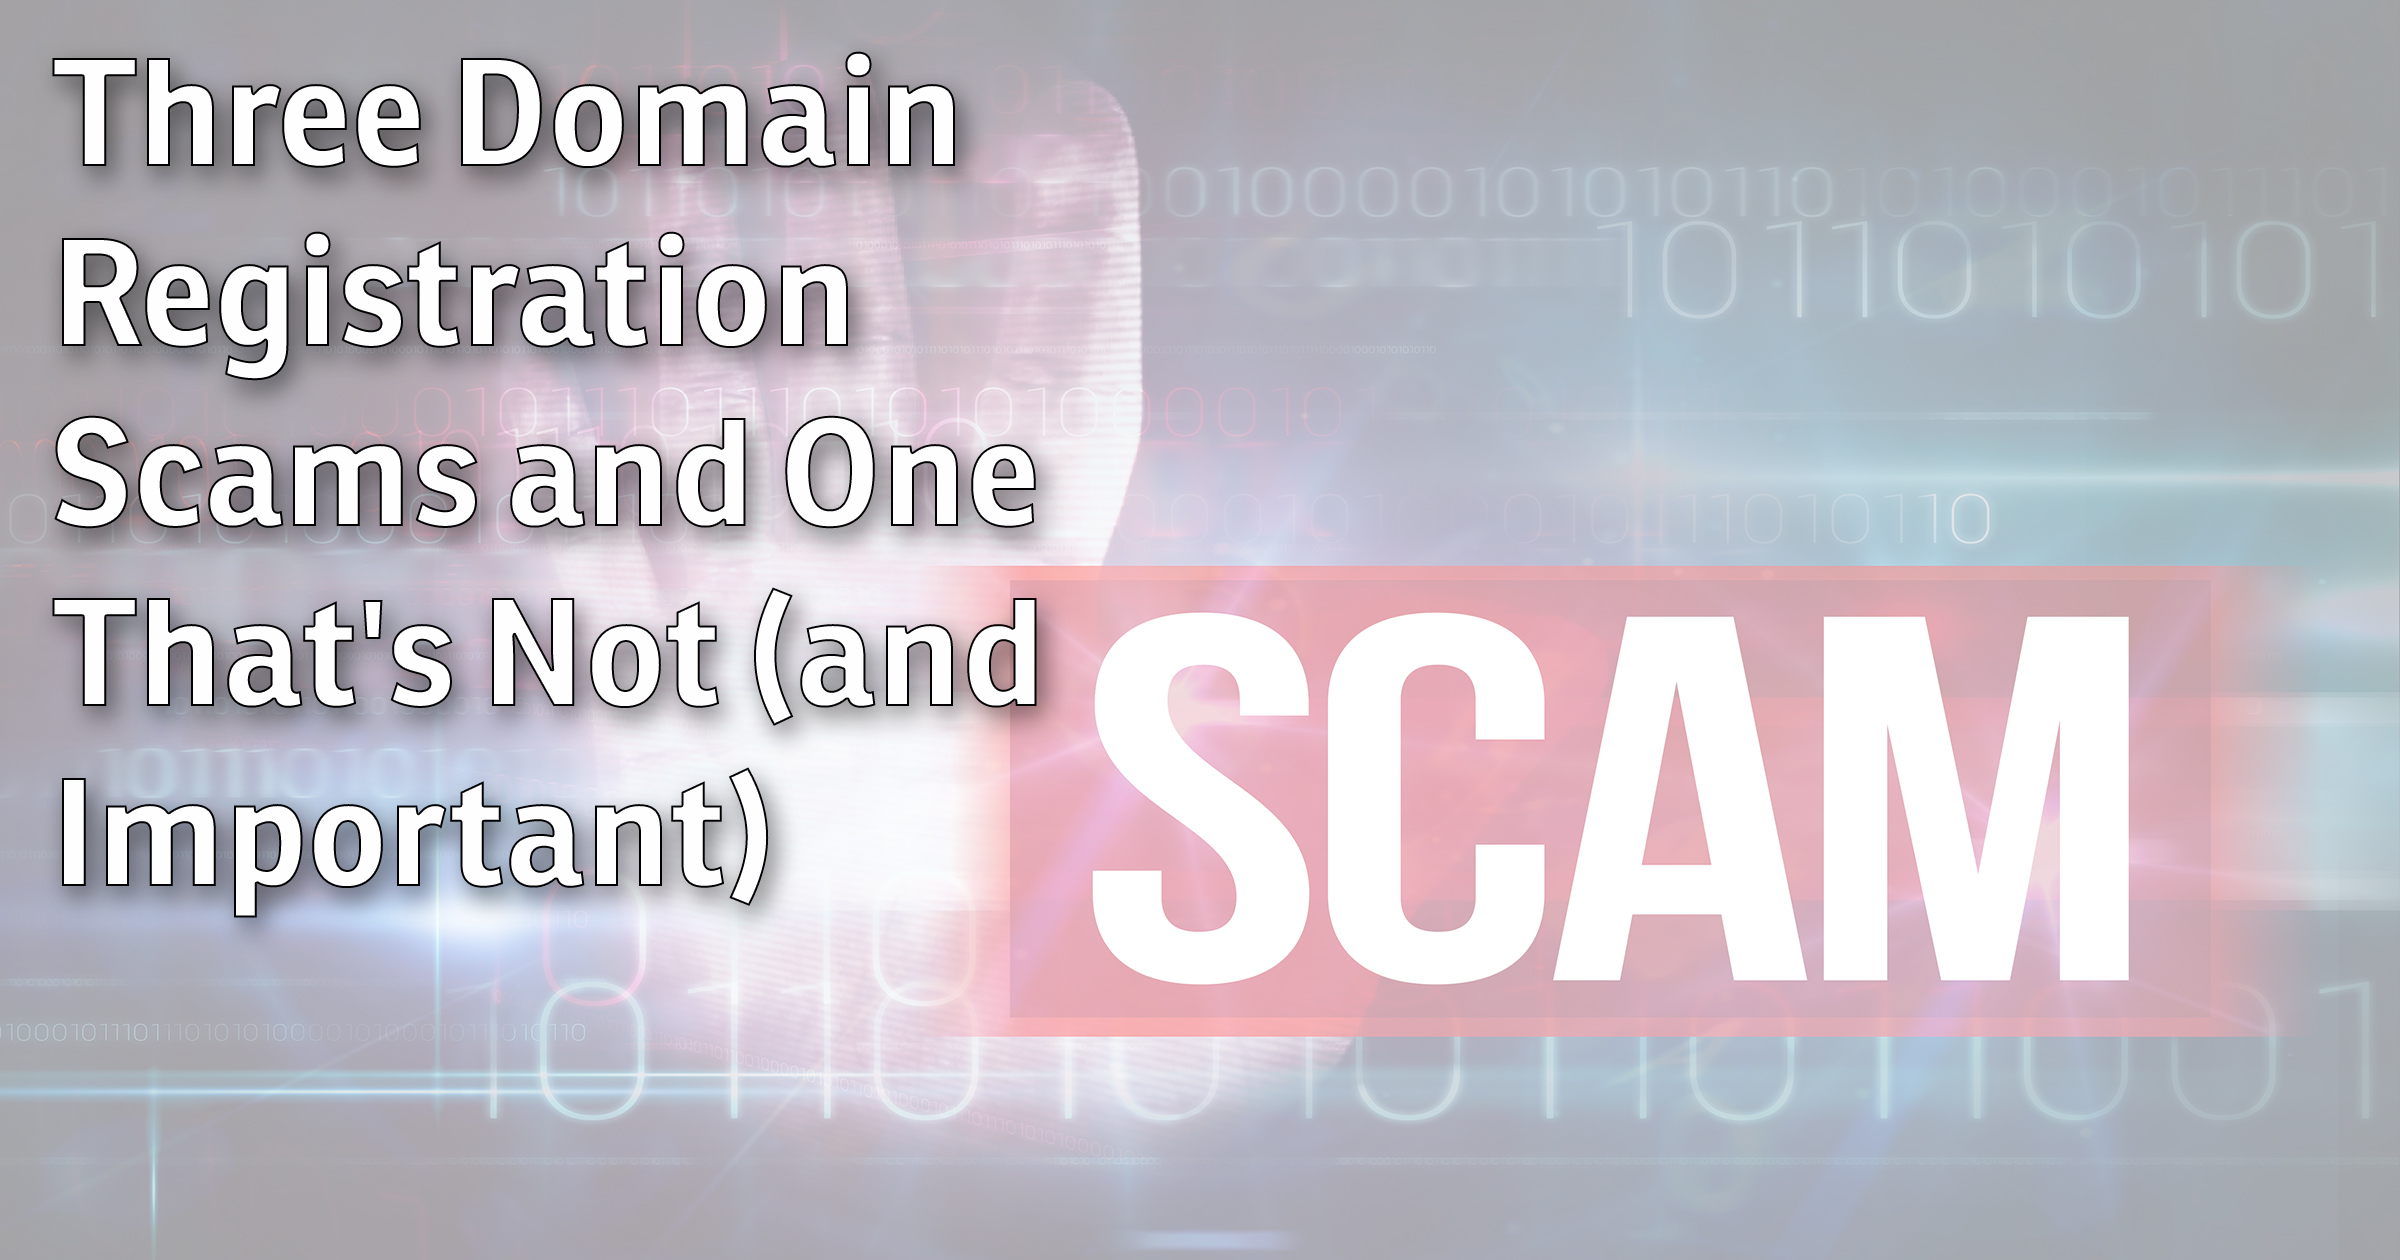 Three Domain Registration Scams and One That's Not